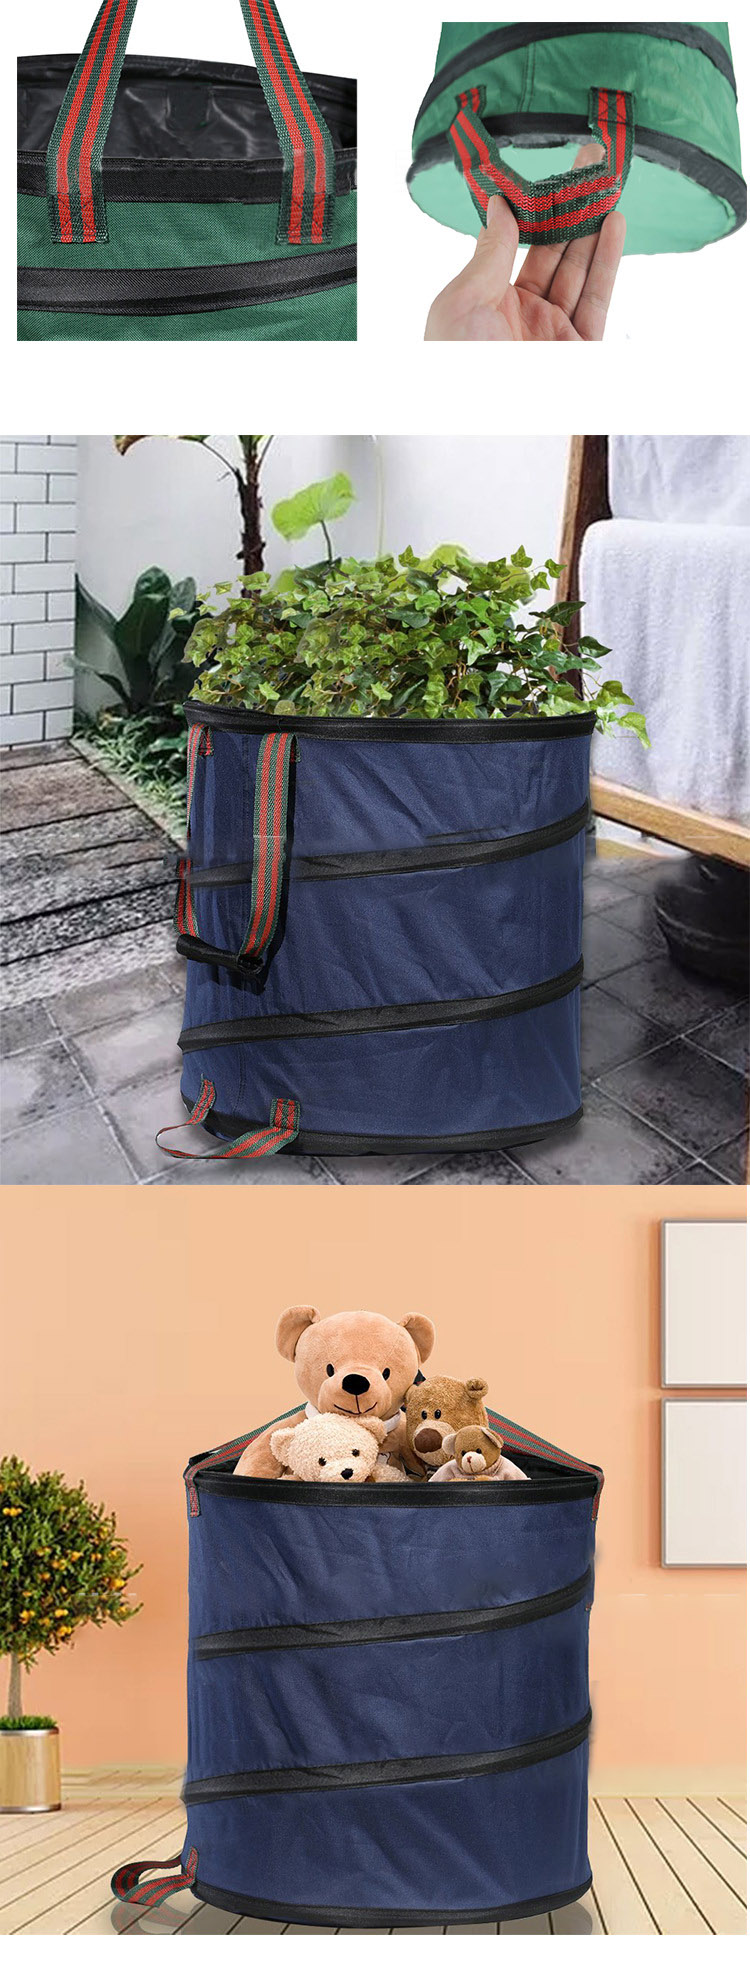 Foldable-Garden-Spring-Collecting-Bucket-Bag--Collapsible-Leaves-Housekeeping-Storage-Baskets-1294376-5